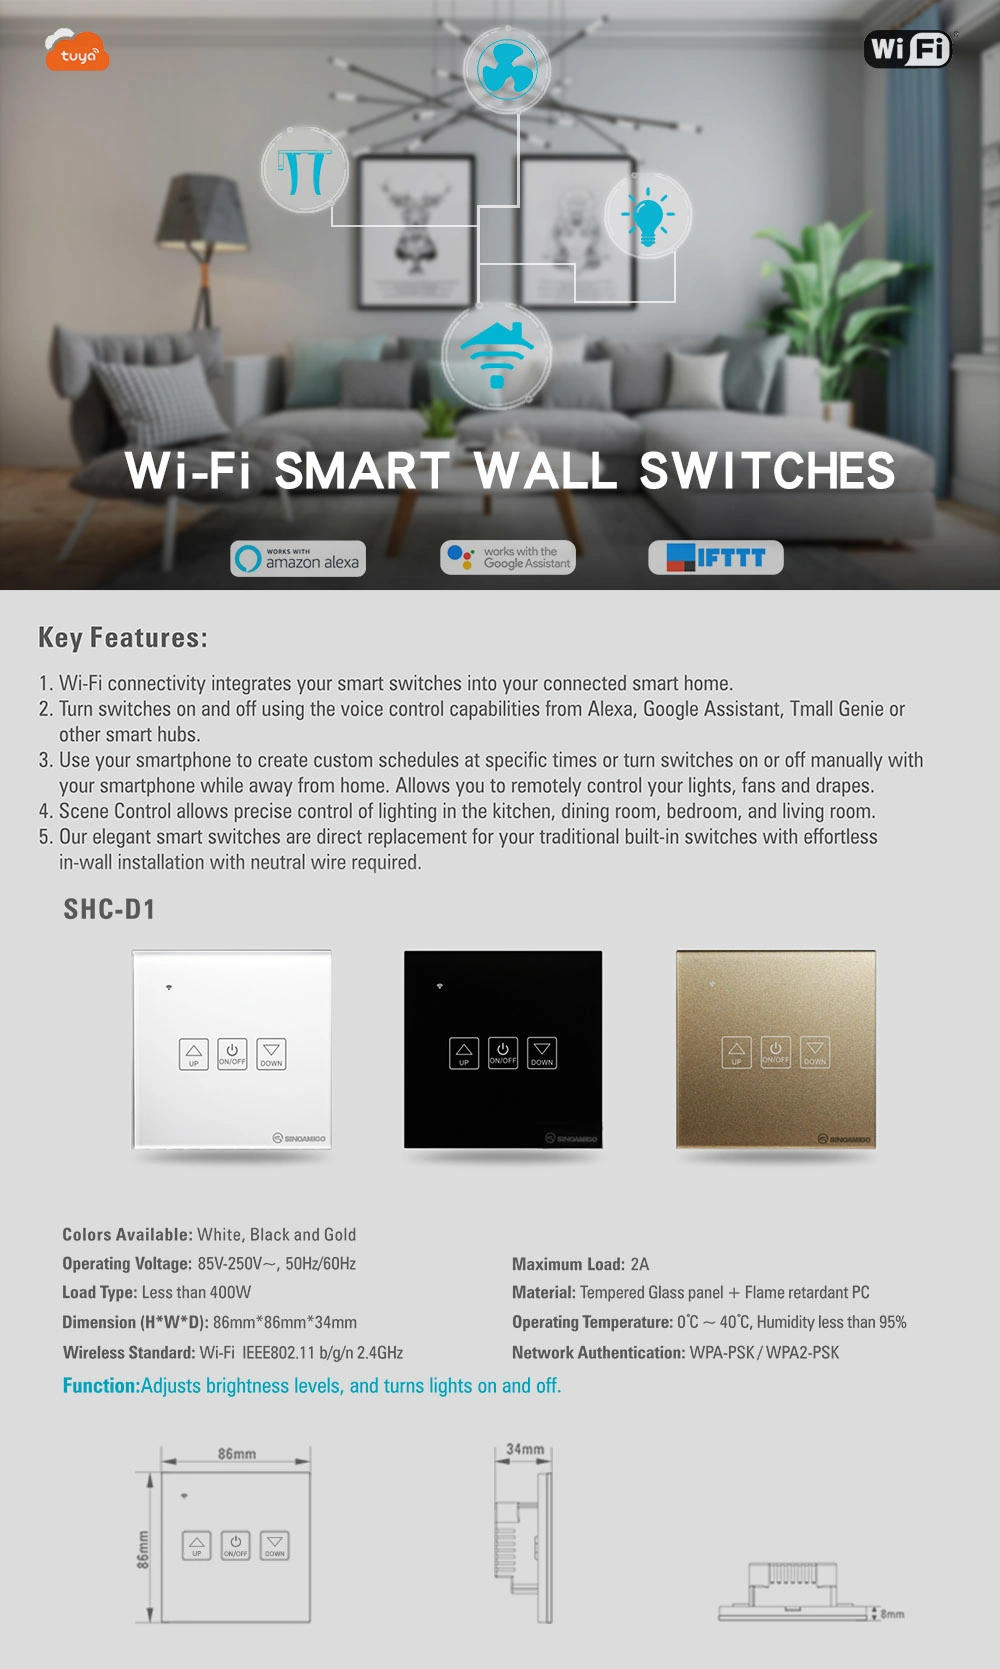 Sinoamigo Smart Home Series WiFi Smart Wall Switch Remotely Control, Dimming Lighting System